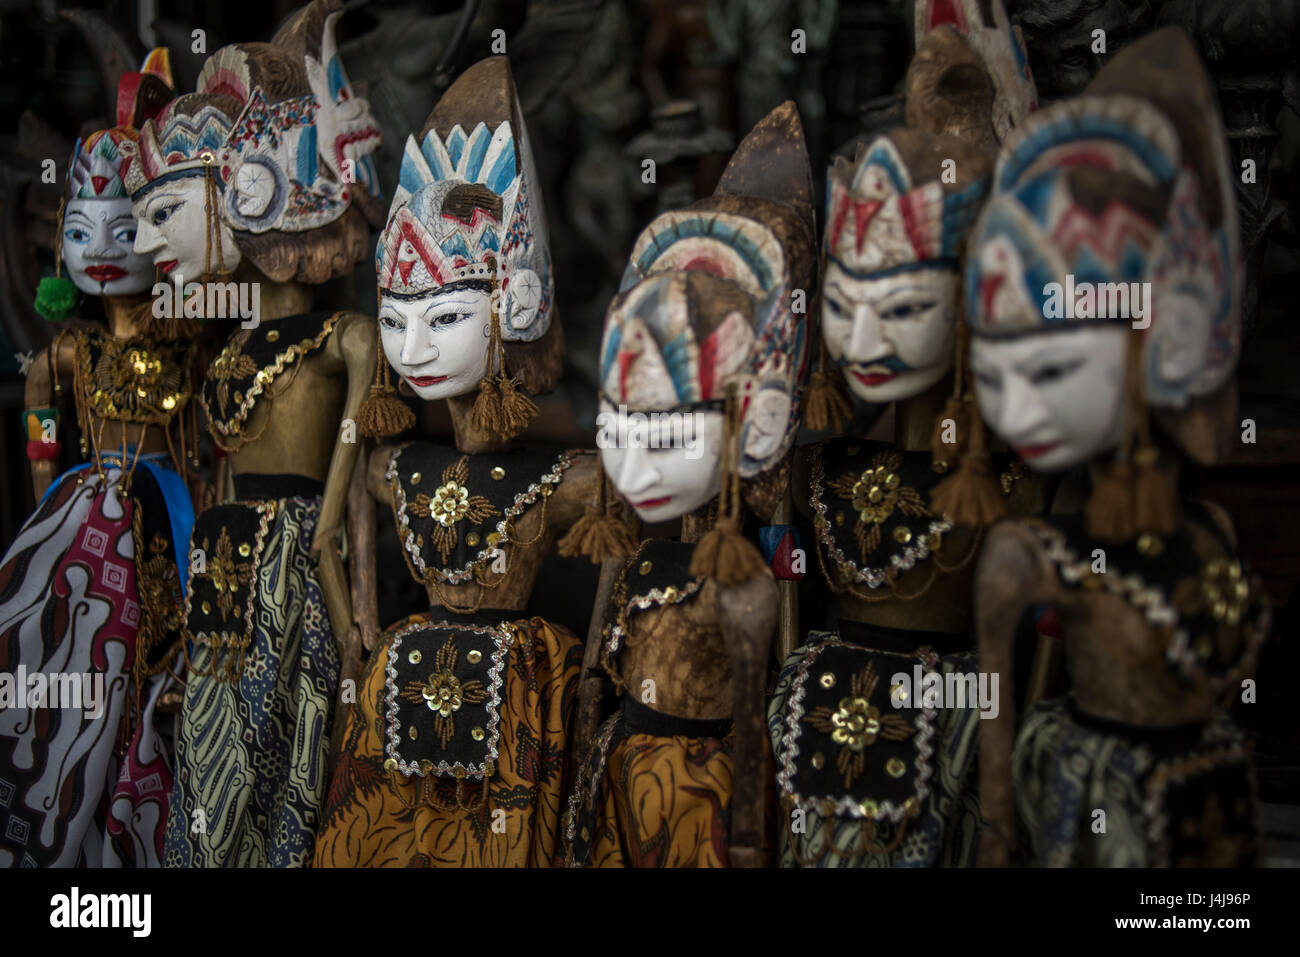 Traditional wooden puppets (wayang golek) from Java, Indonesia. Stock Photo